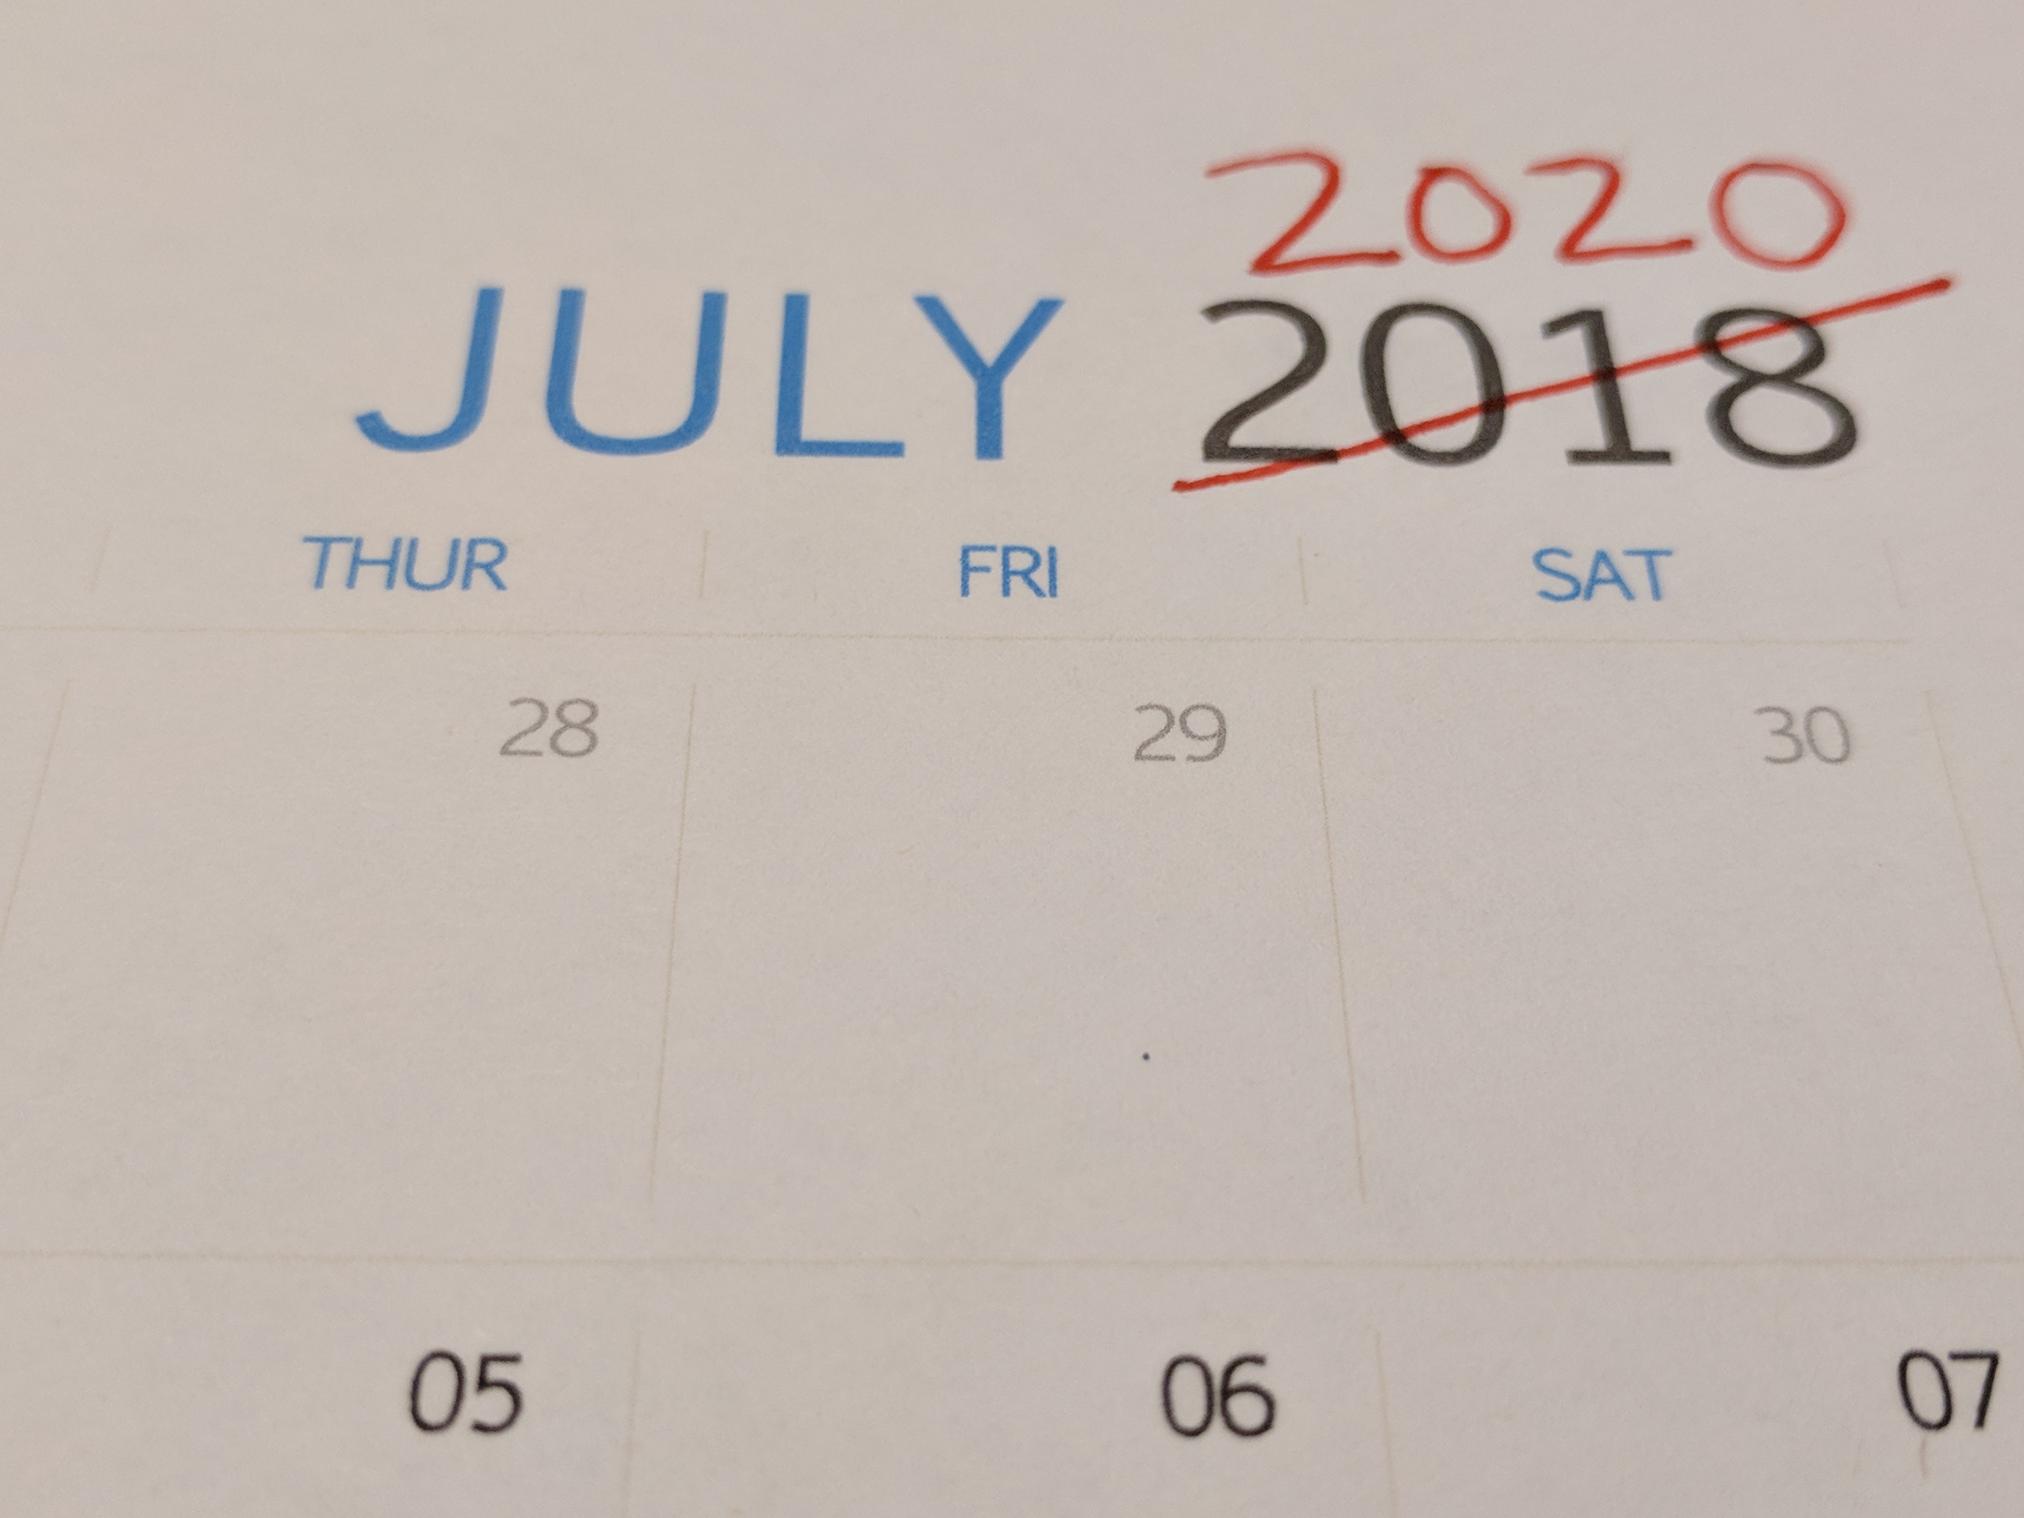 jULY 2018 Calendar with 2018 crossed out and 2020 written in